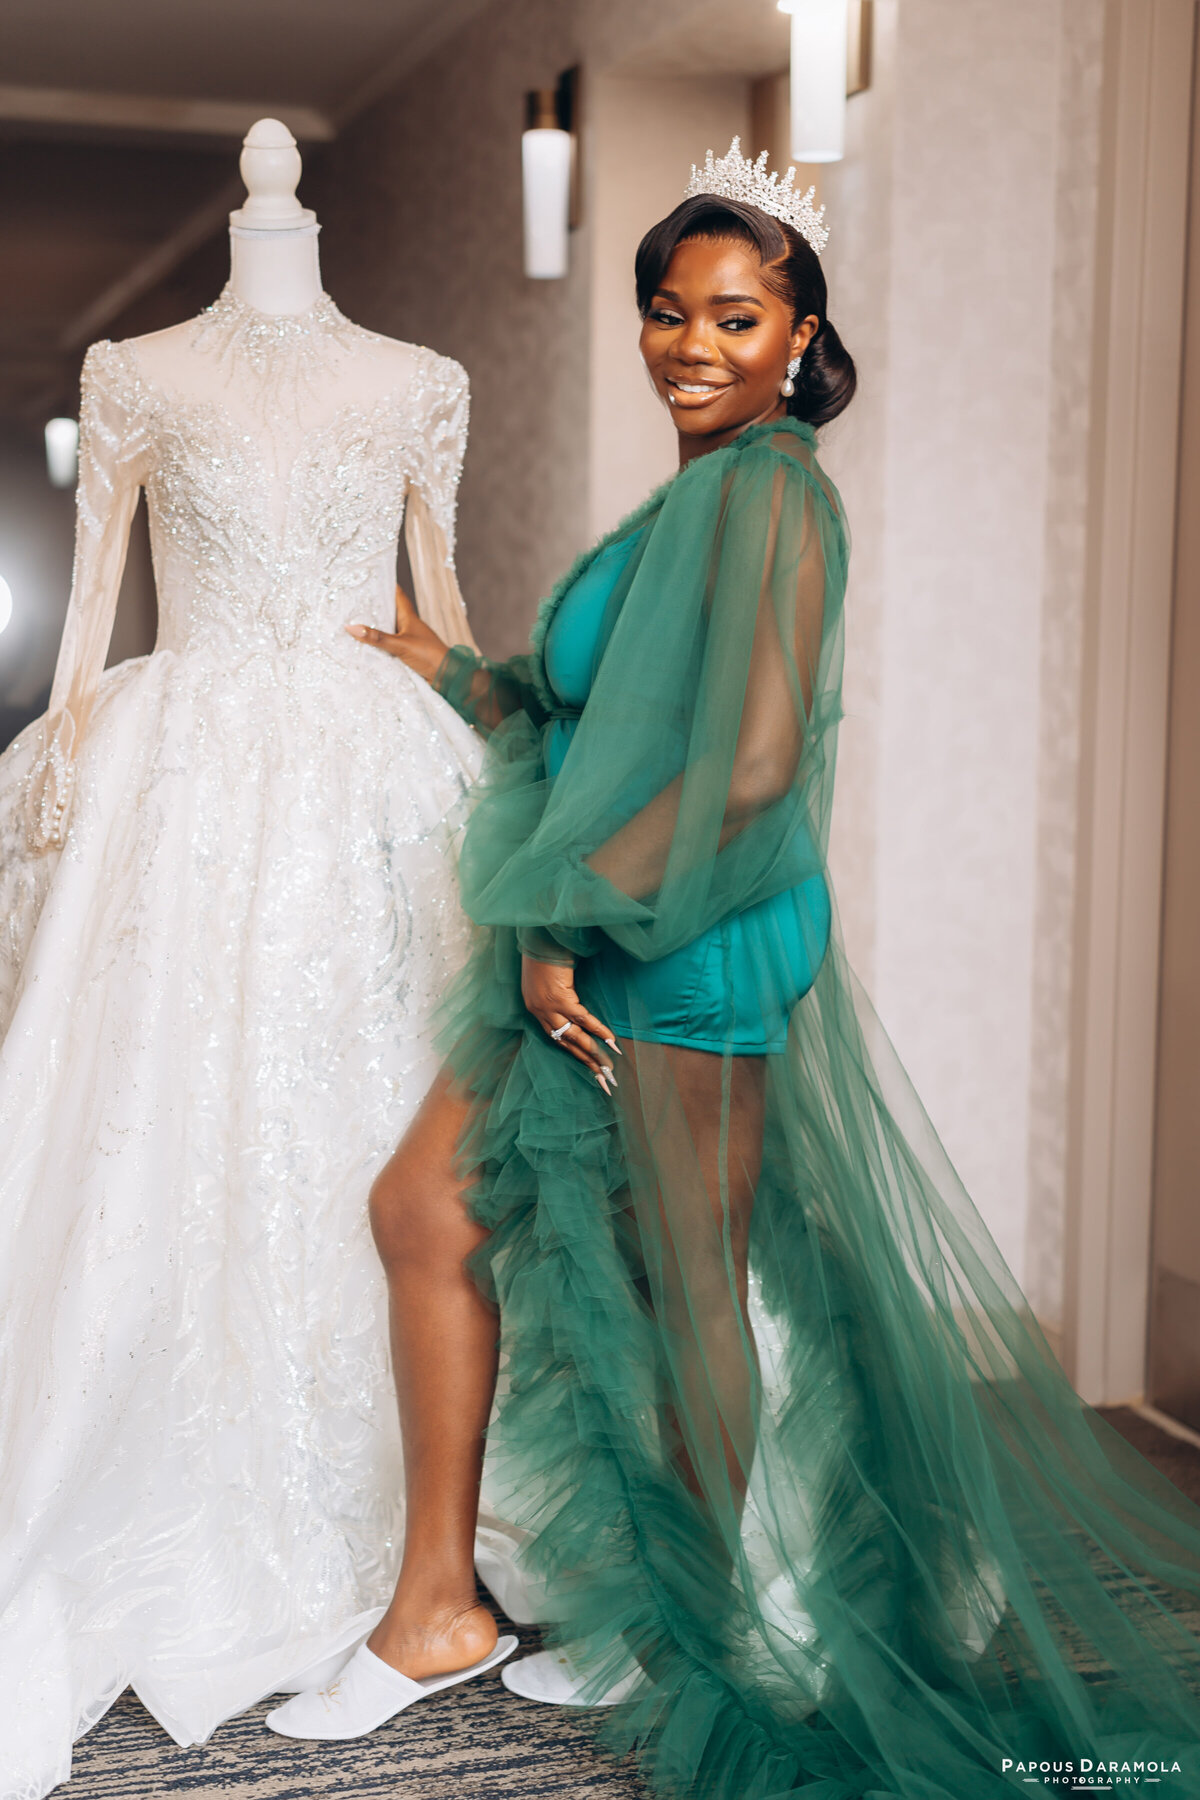 Abigail and Abije Oruka Events Papouse photographer Wedding event planners Toronto planner African Nigerian Eyitayo Dada Dara Ayoola outdoor ceremony floral princess ballgown rolls royce groom suit potraits  paradise banquet hall vaughn 80